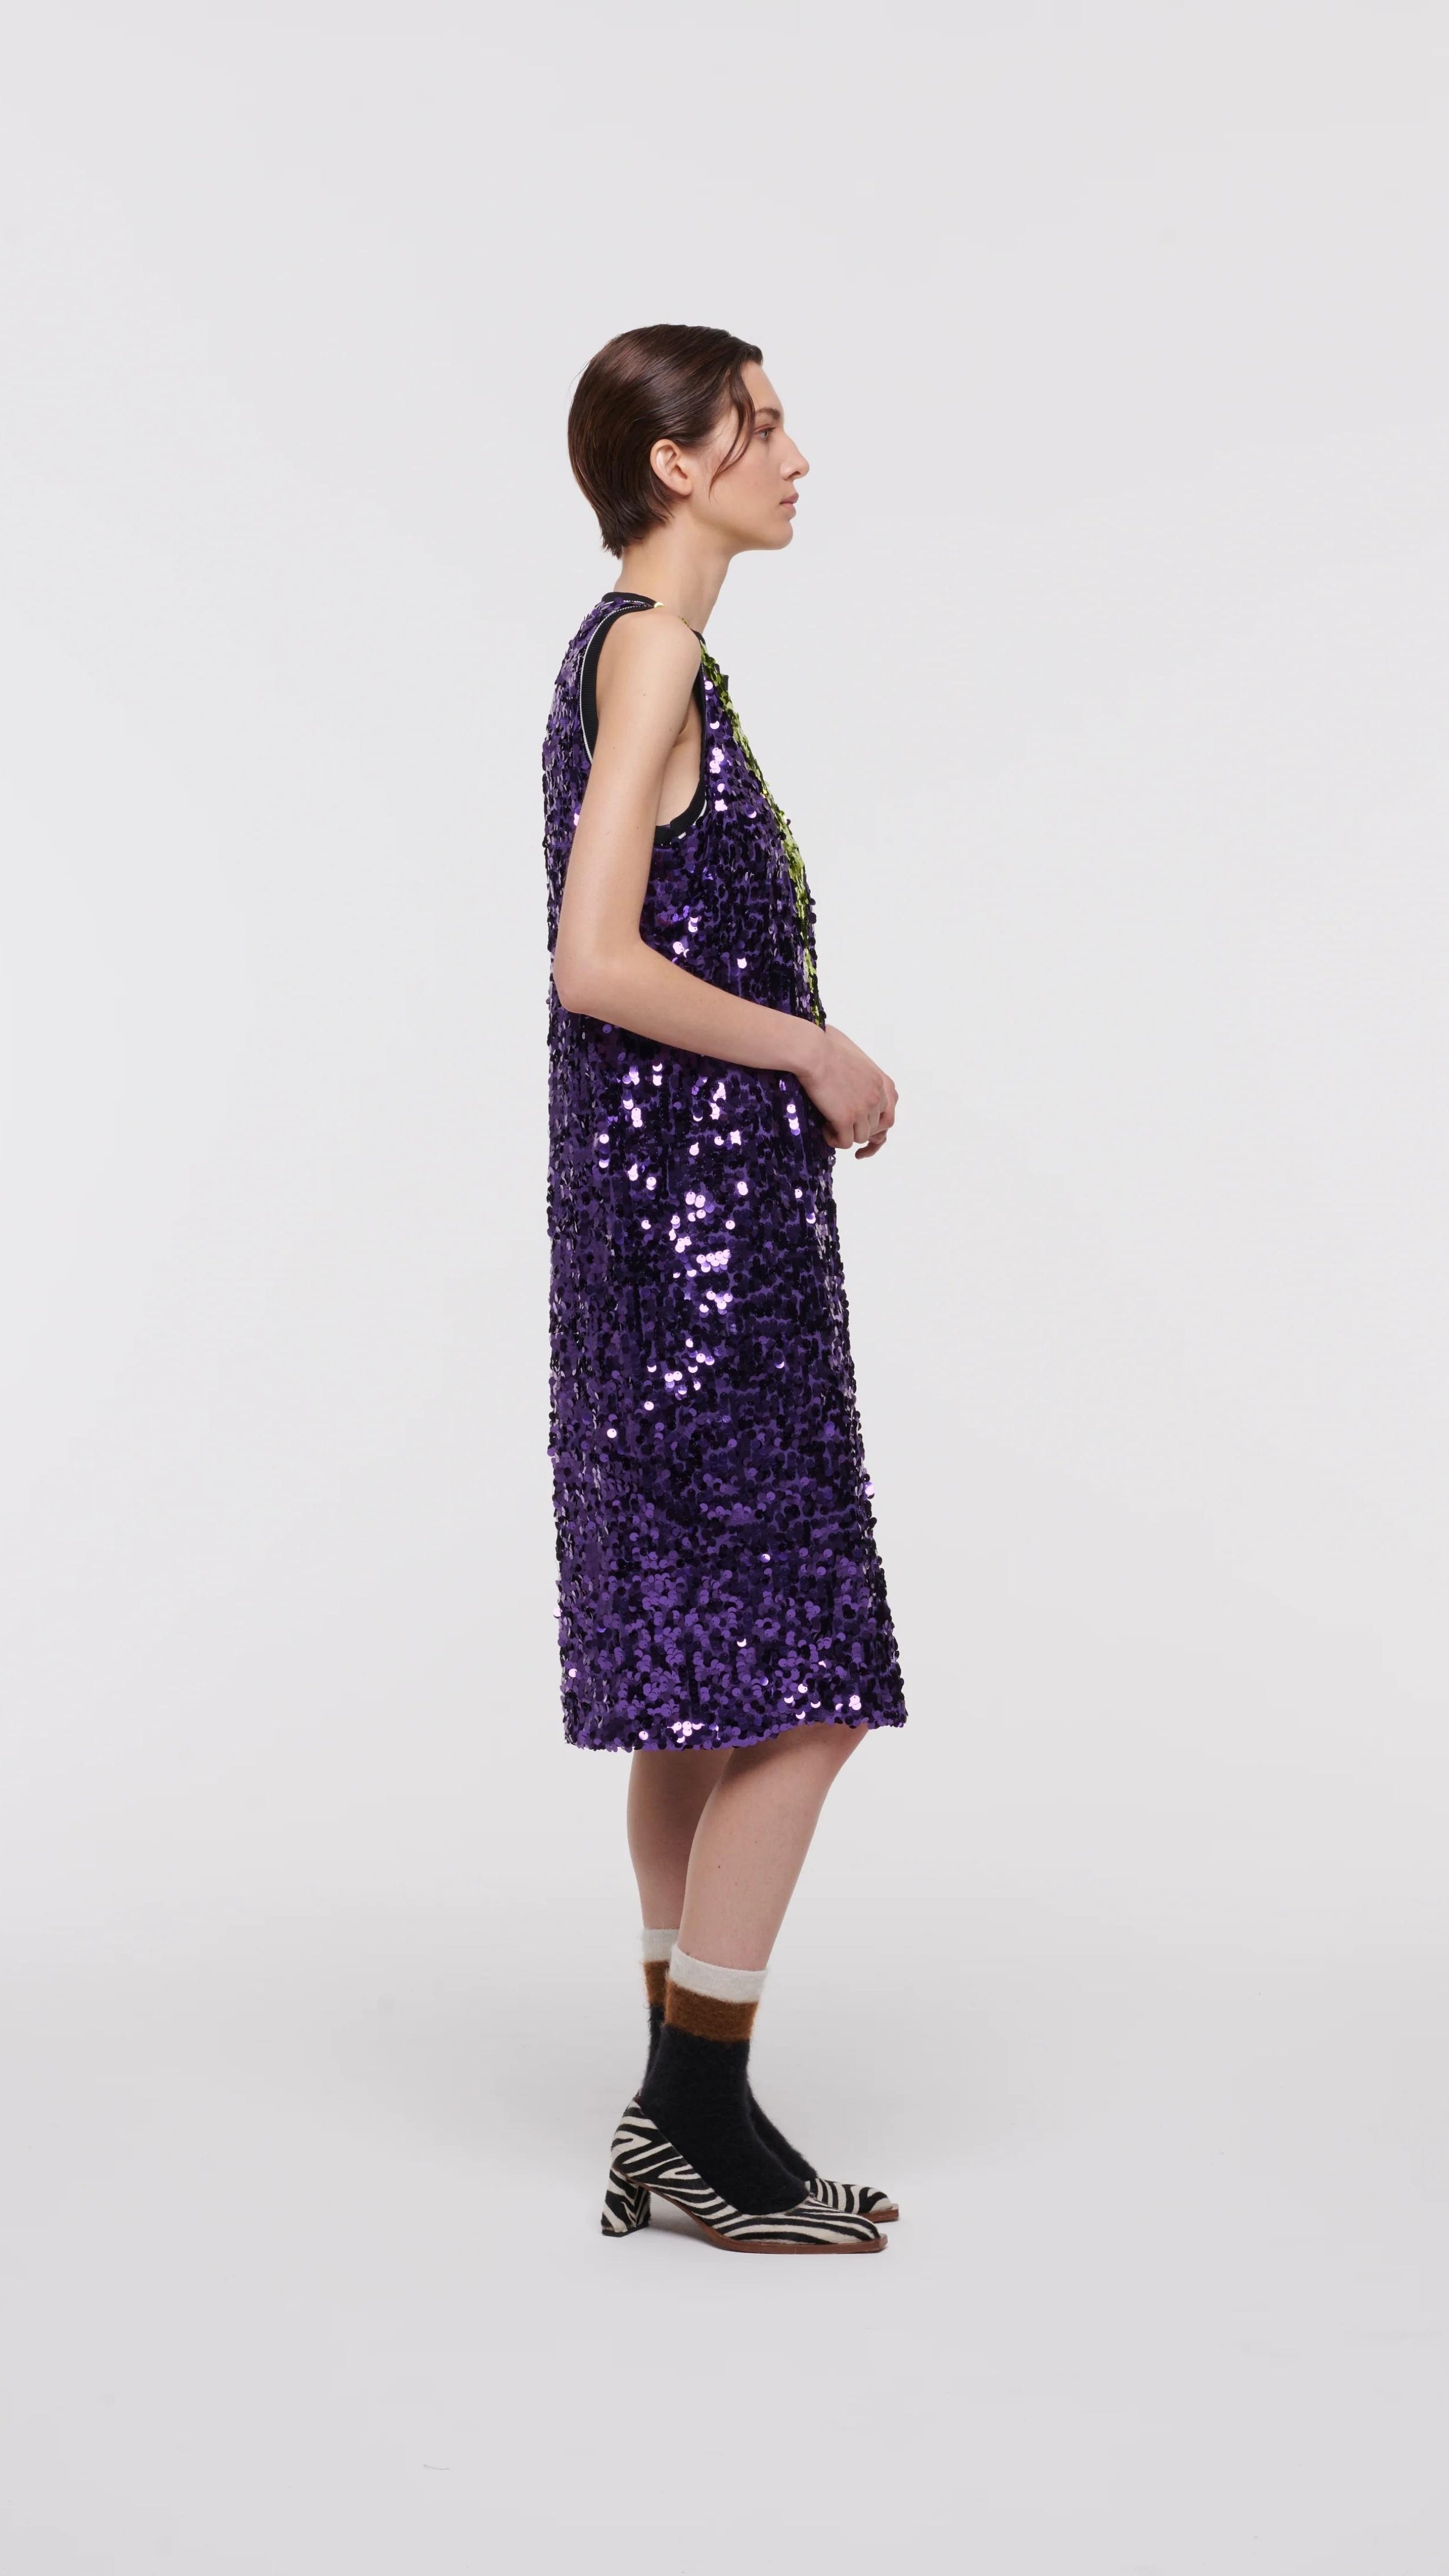 Plan C Color Block Sequin Dress. Sleeveless racer back style midi length dress in purple and lime green. Trimmed in black at the neckline and arms. The green sequins form a v shape in the front. Shown on model facing side.